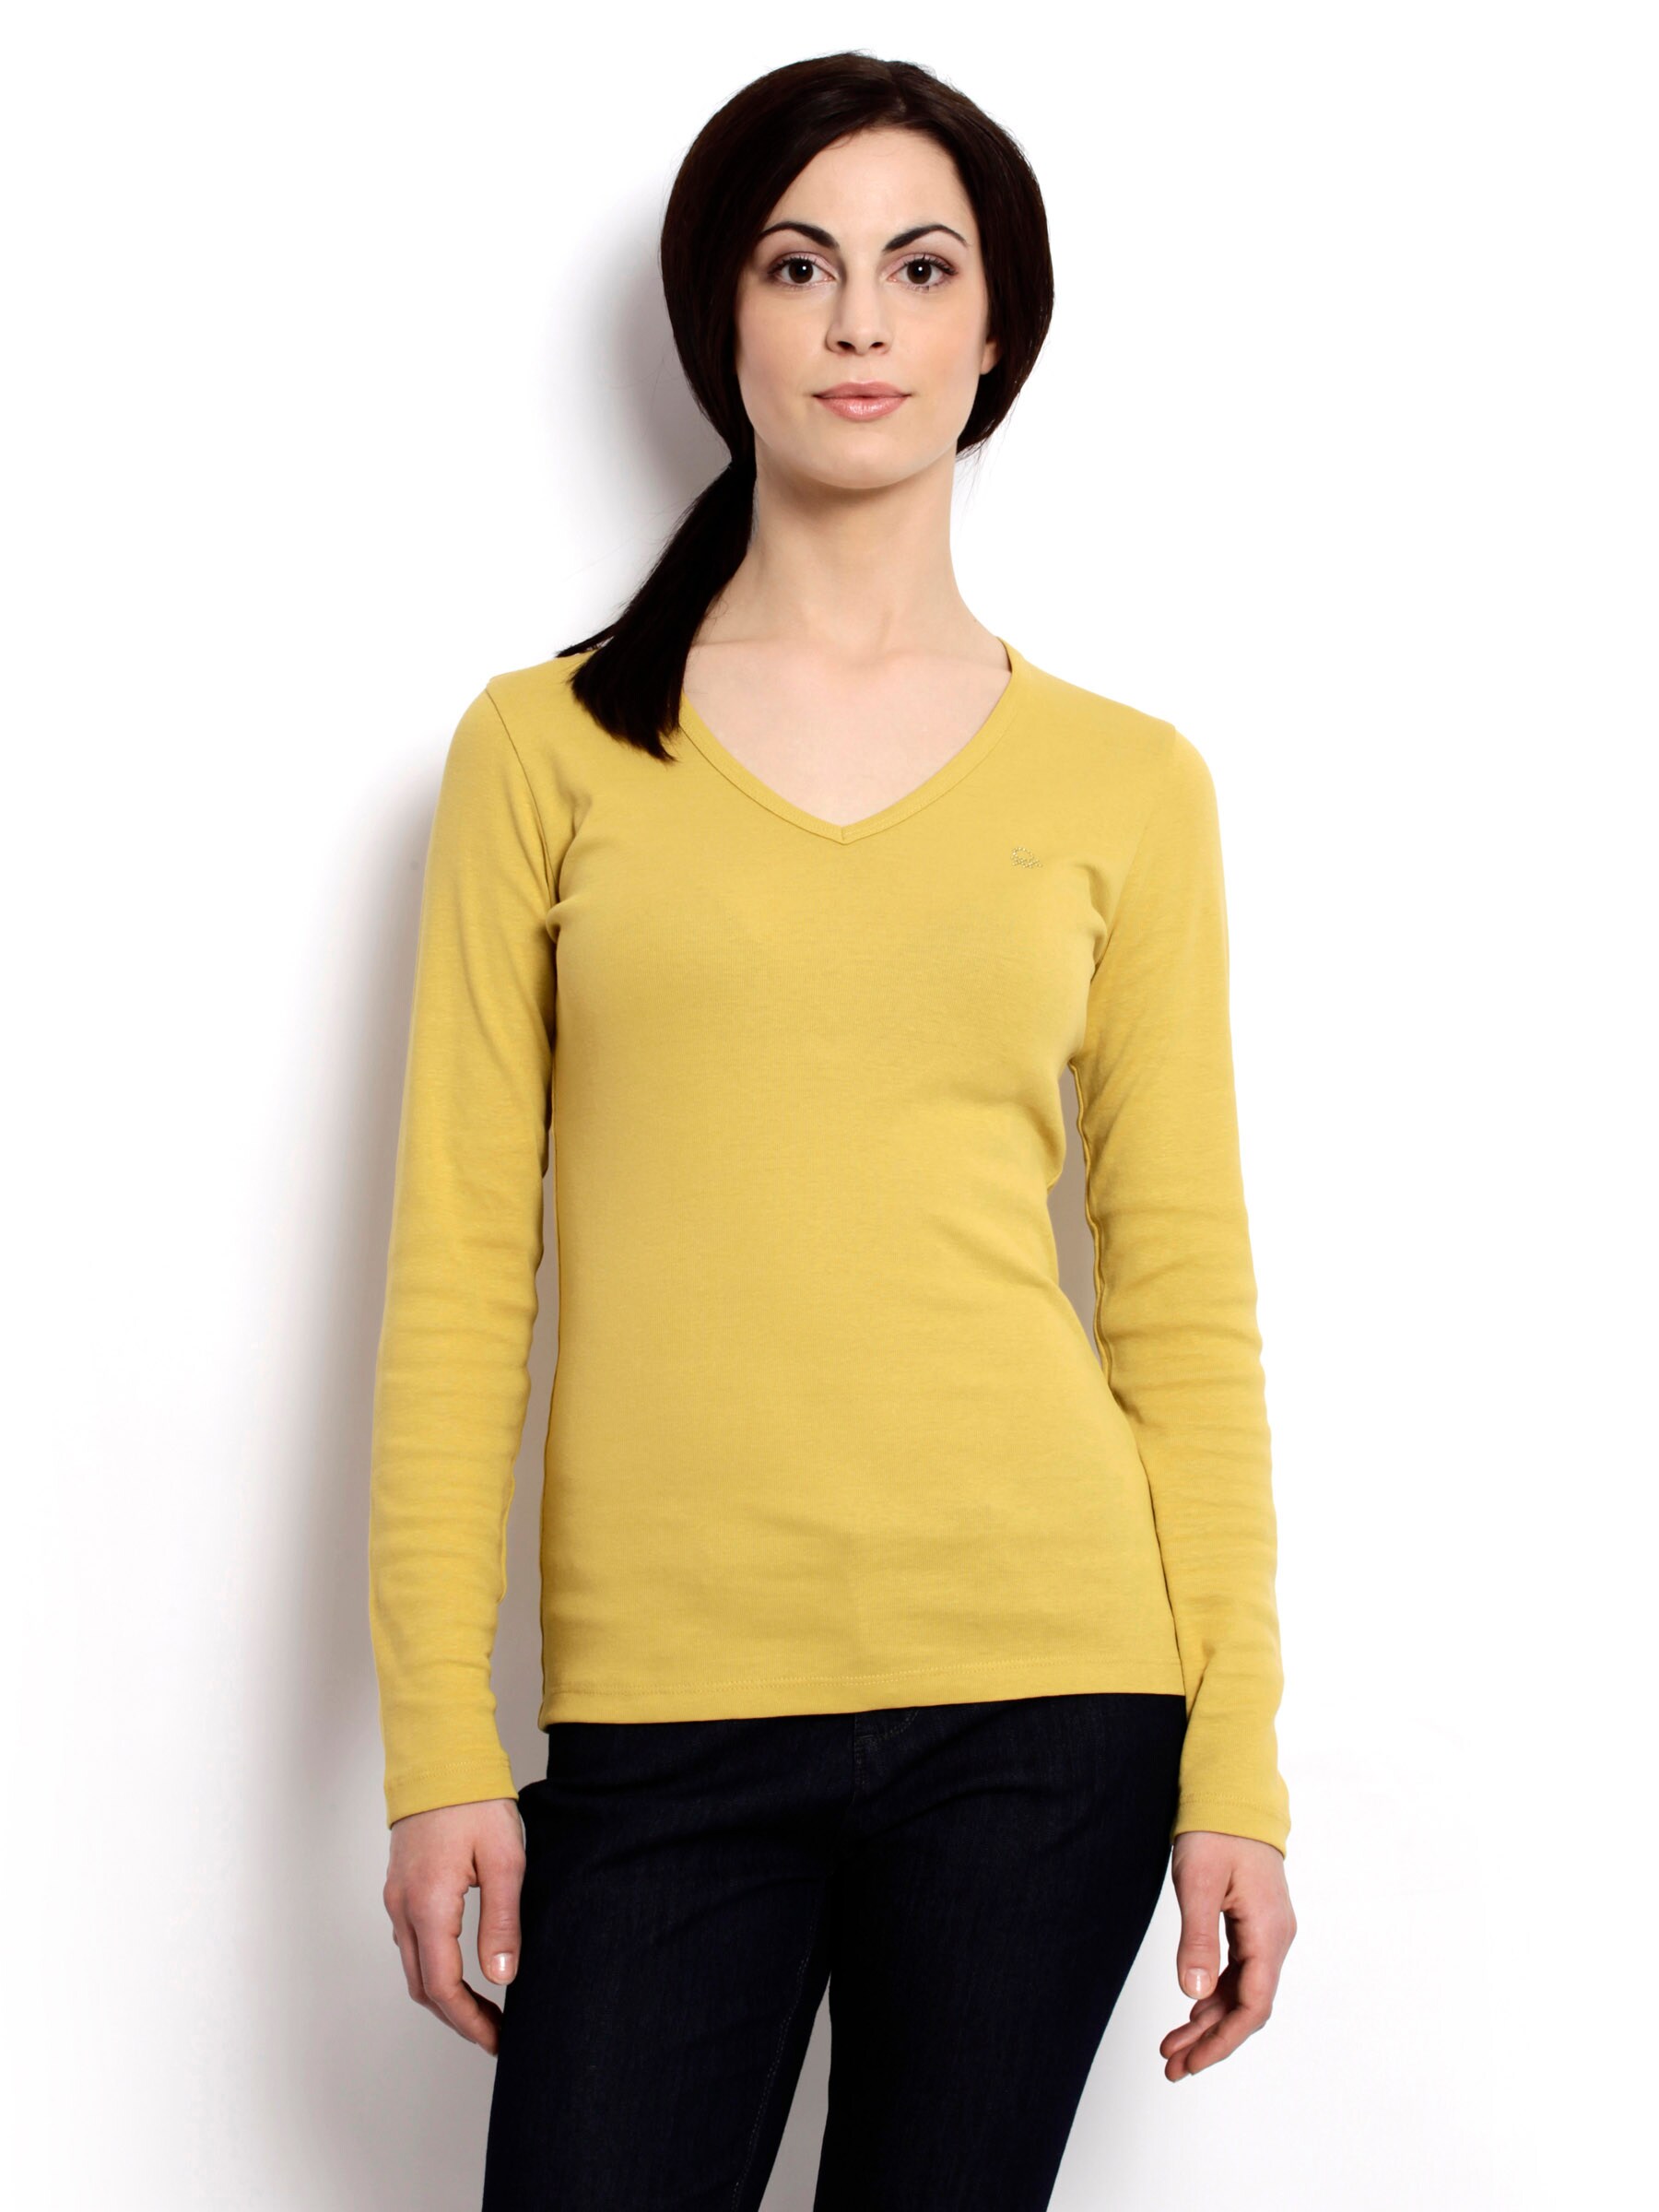 United Colors of Benetton Women Solid Yellow Top